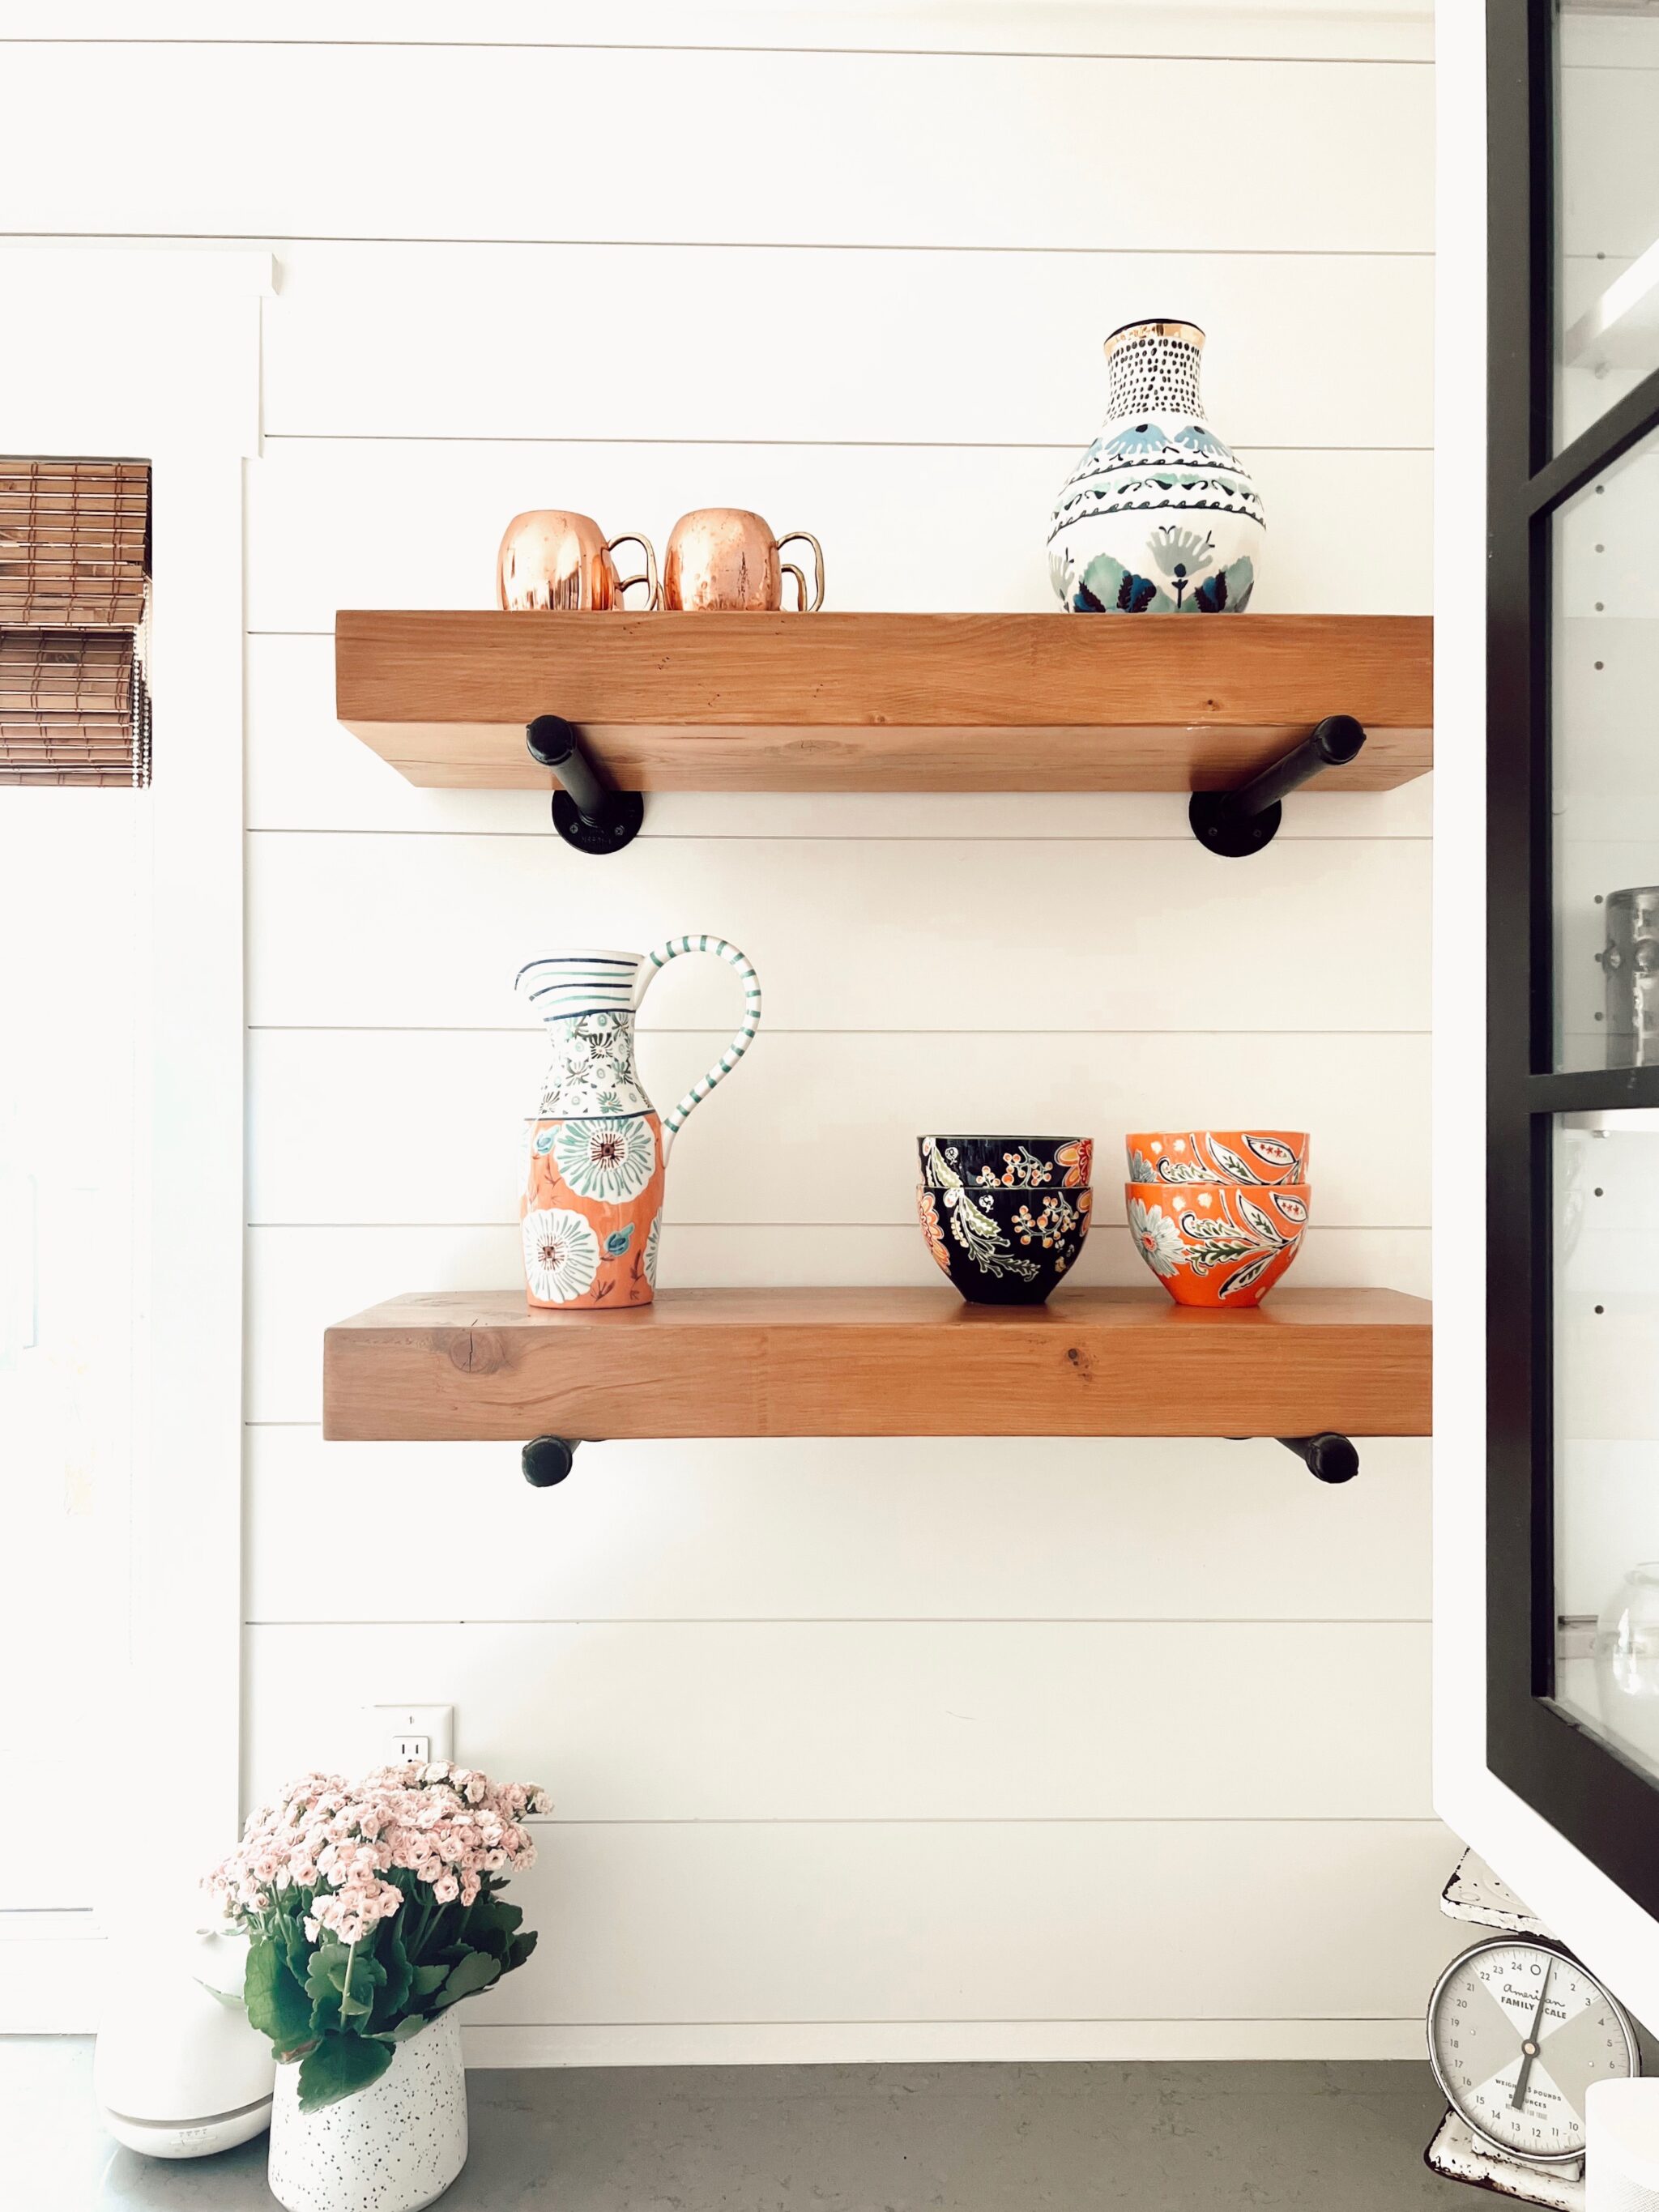 decorated kitchen shelves